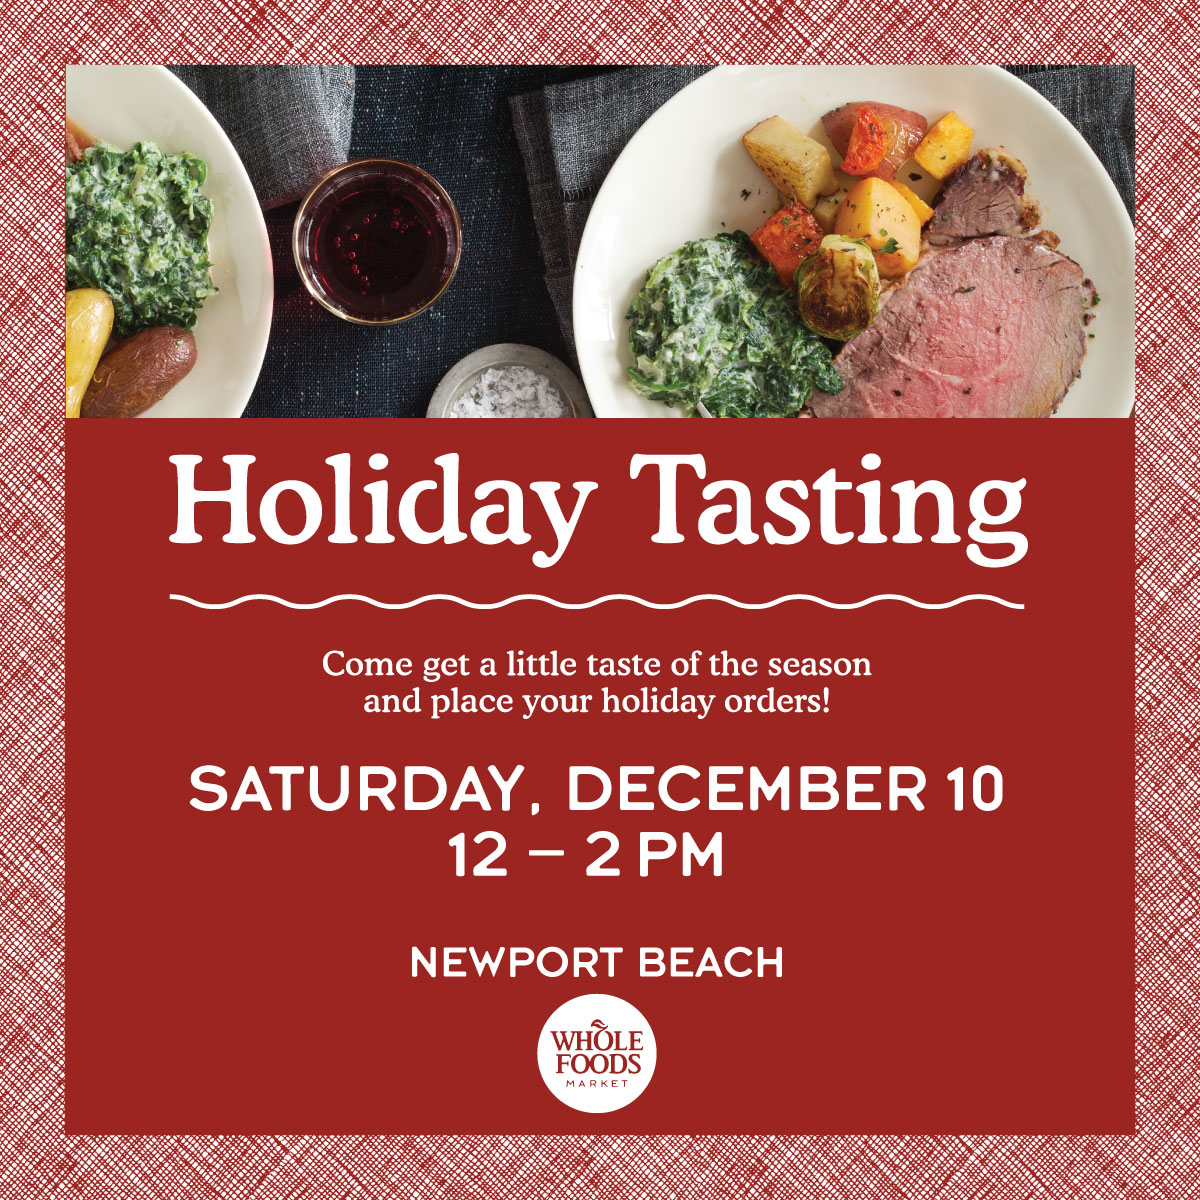 Holiday Tasting at Whole Foods